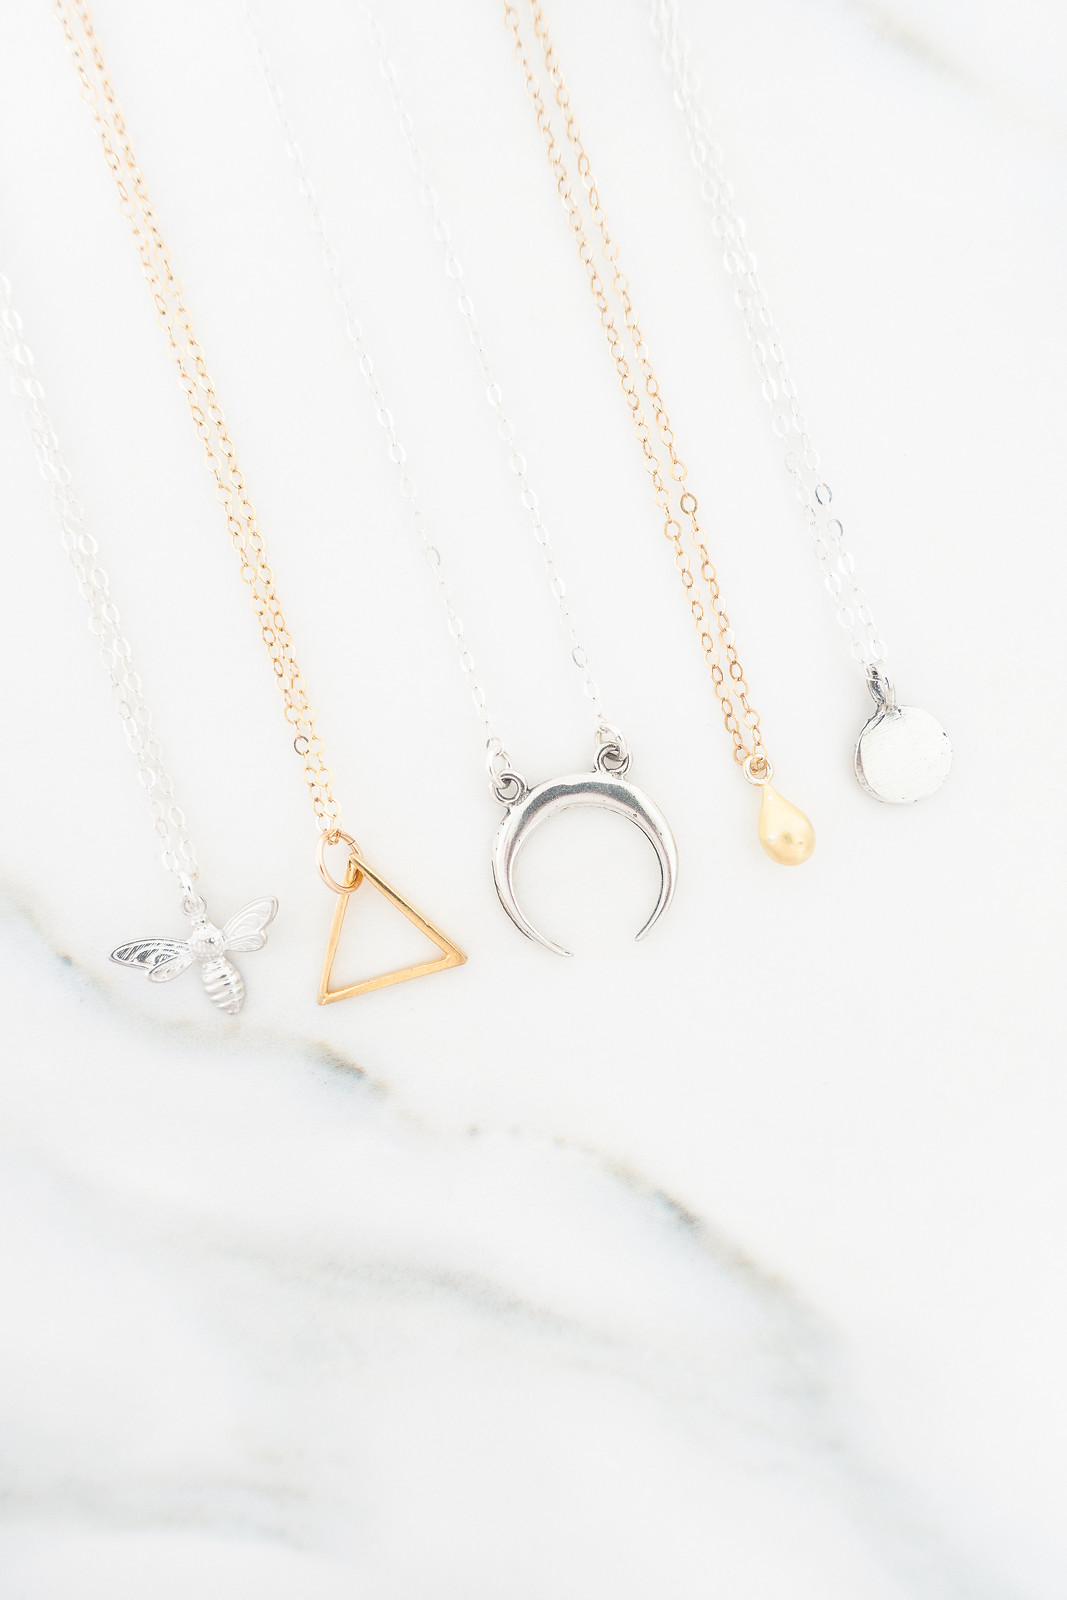 Minimal Jewellery That Goes With Everything